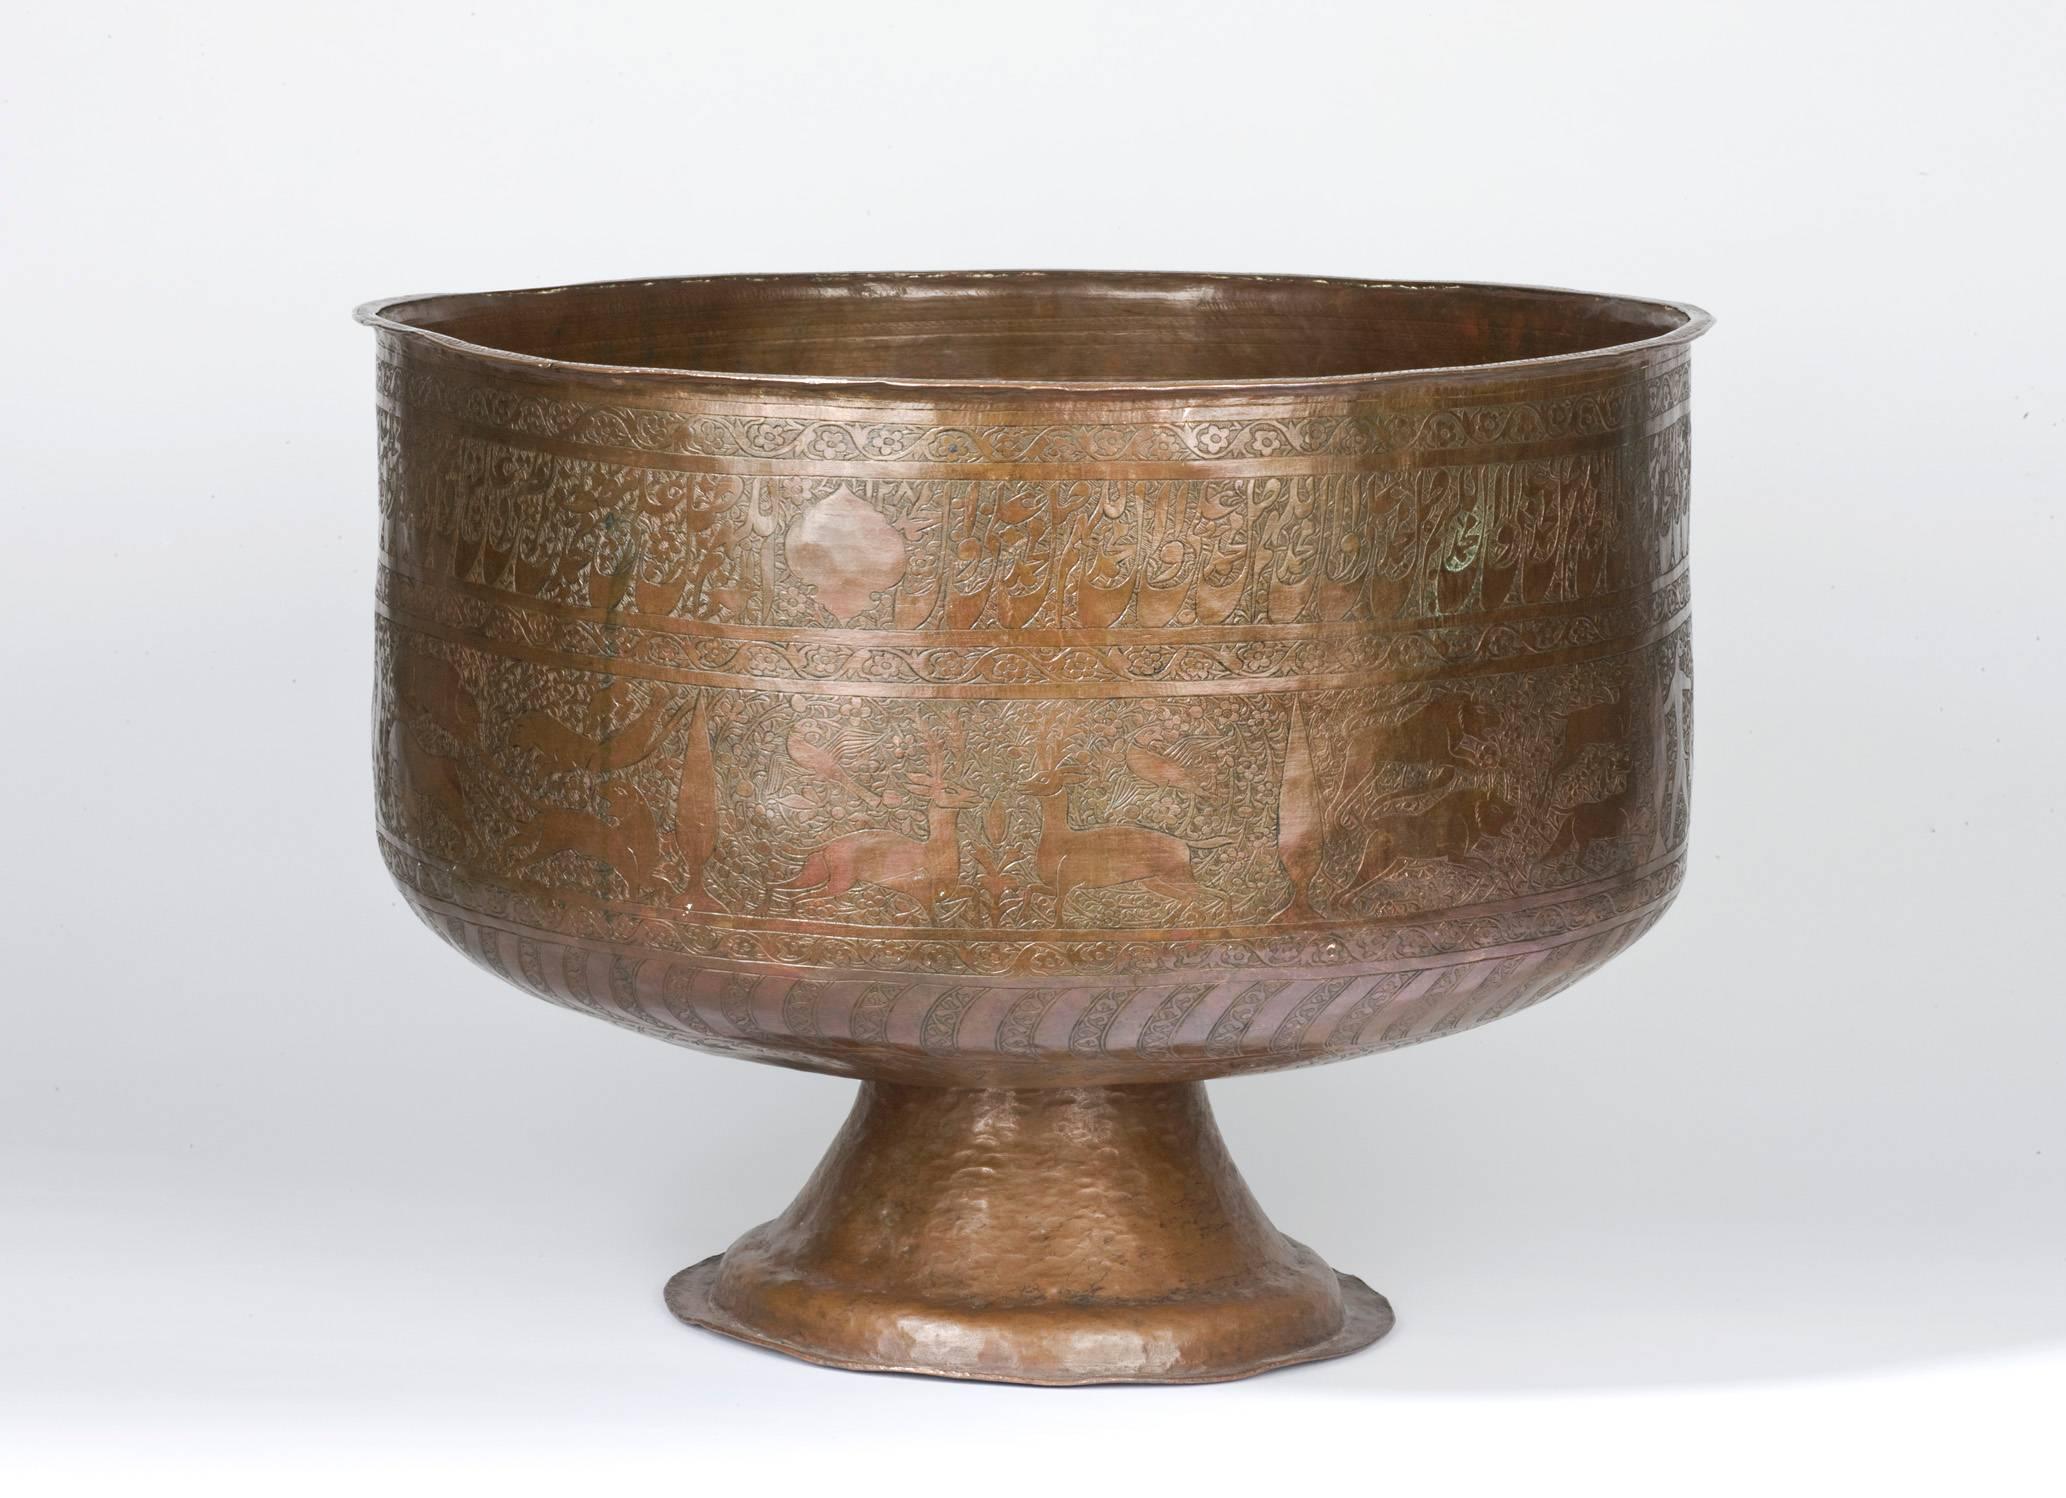 A late 18th century Iranian copper bowl featuring animal motif decoration and Arabic inscriptions. It depicts elephants, birds and felines attacking gazelles. The material used is copper, it is a very fine handcrafted work of art.
Dated 1787 to the